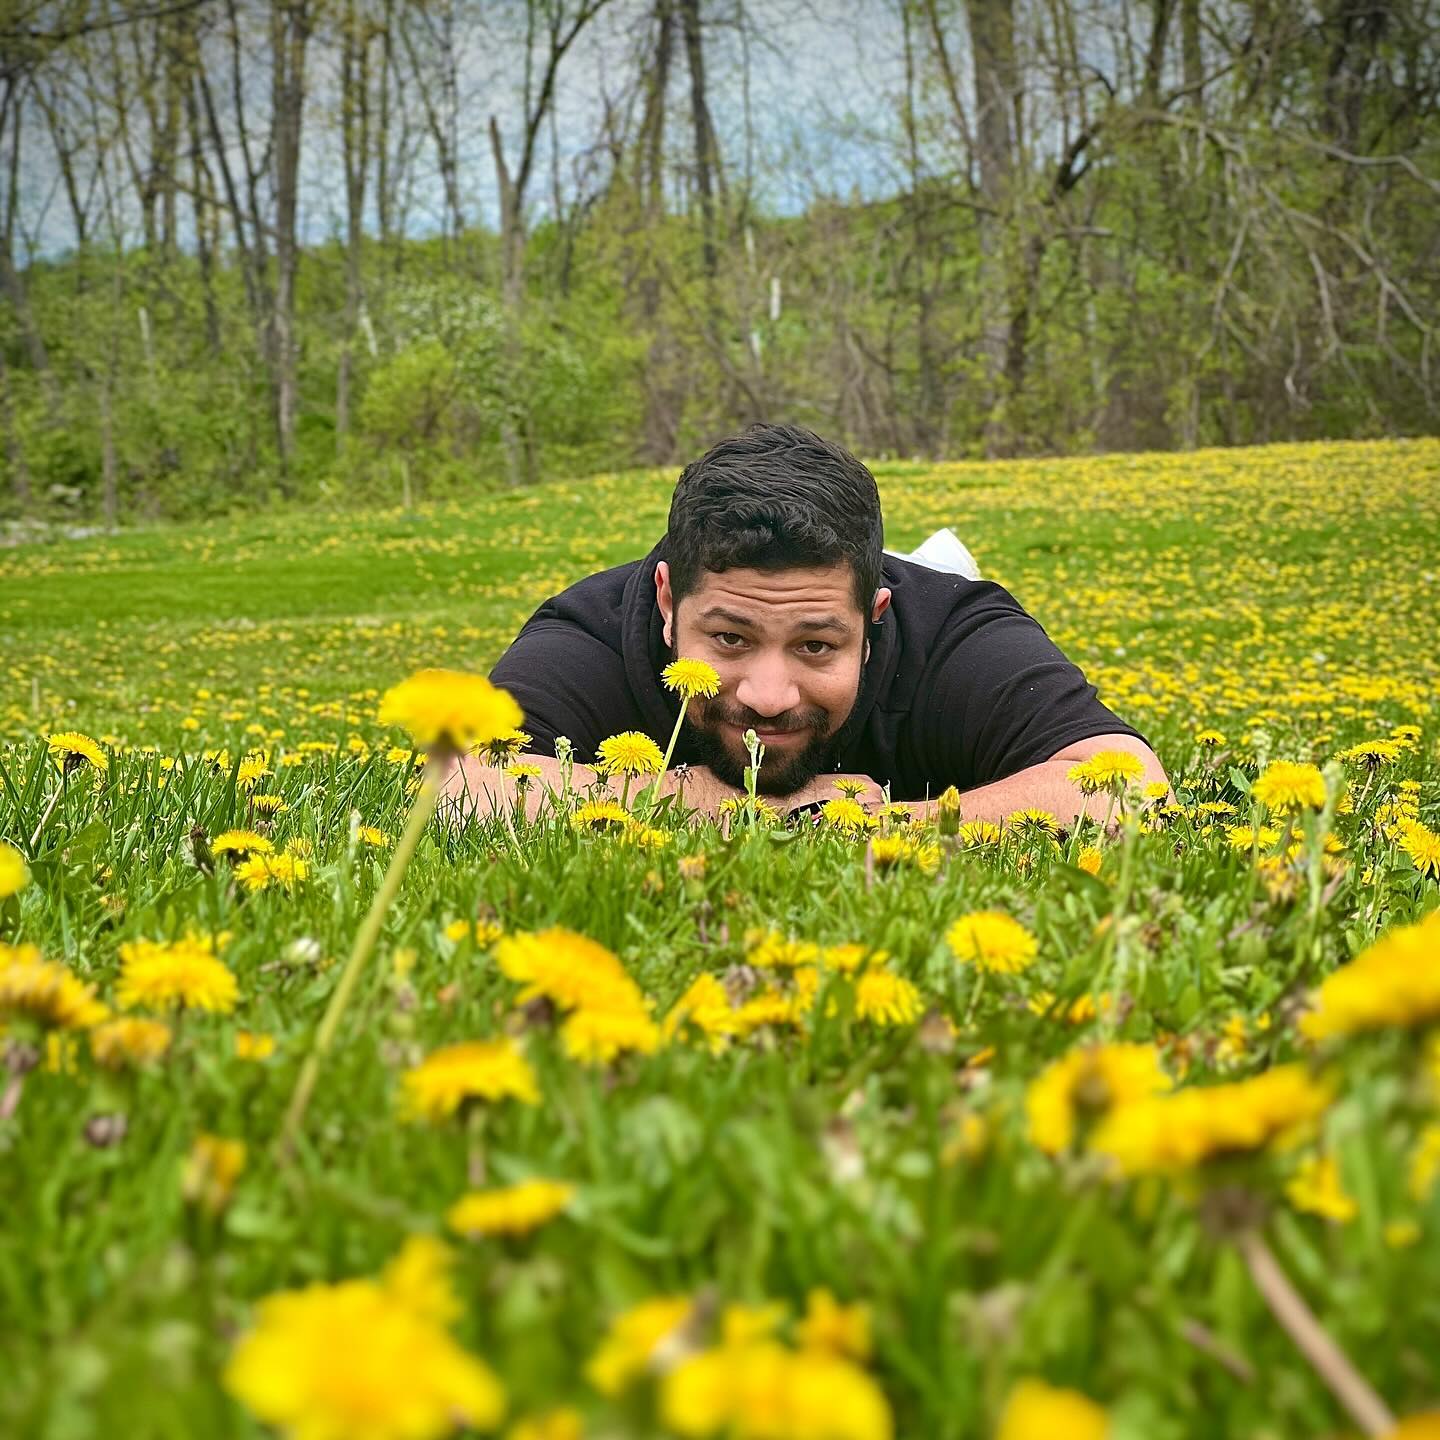 Last week was really hard, and not much to smile about. I was determined to start this week off with good things. I make it a habit to take a walk in the park everyday, and today all these dandelions were blooming. Nature makes me really happy, and in reminded me that beautiful times and memories are still to come. 🌼